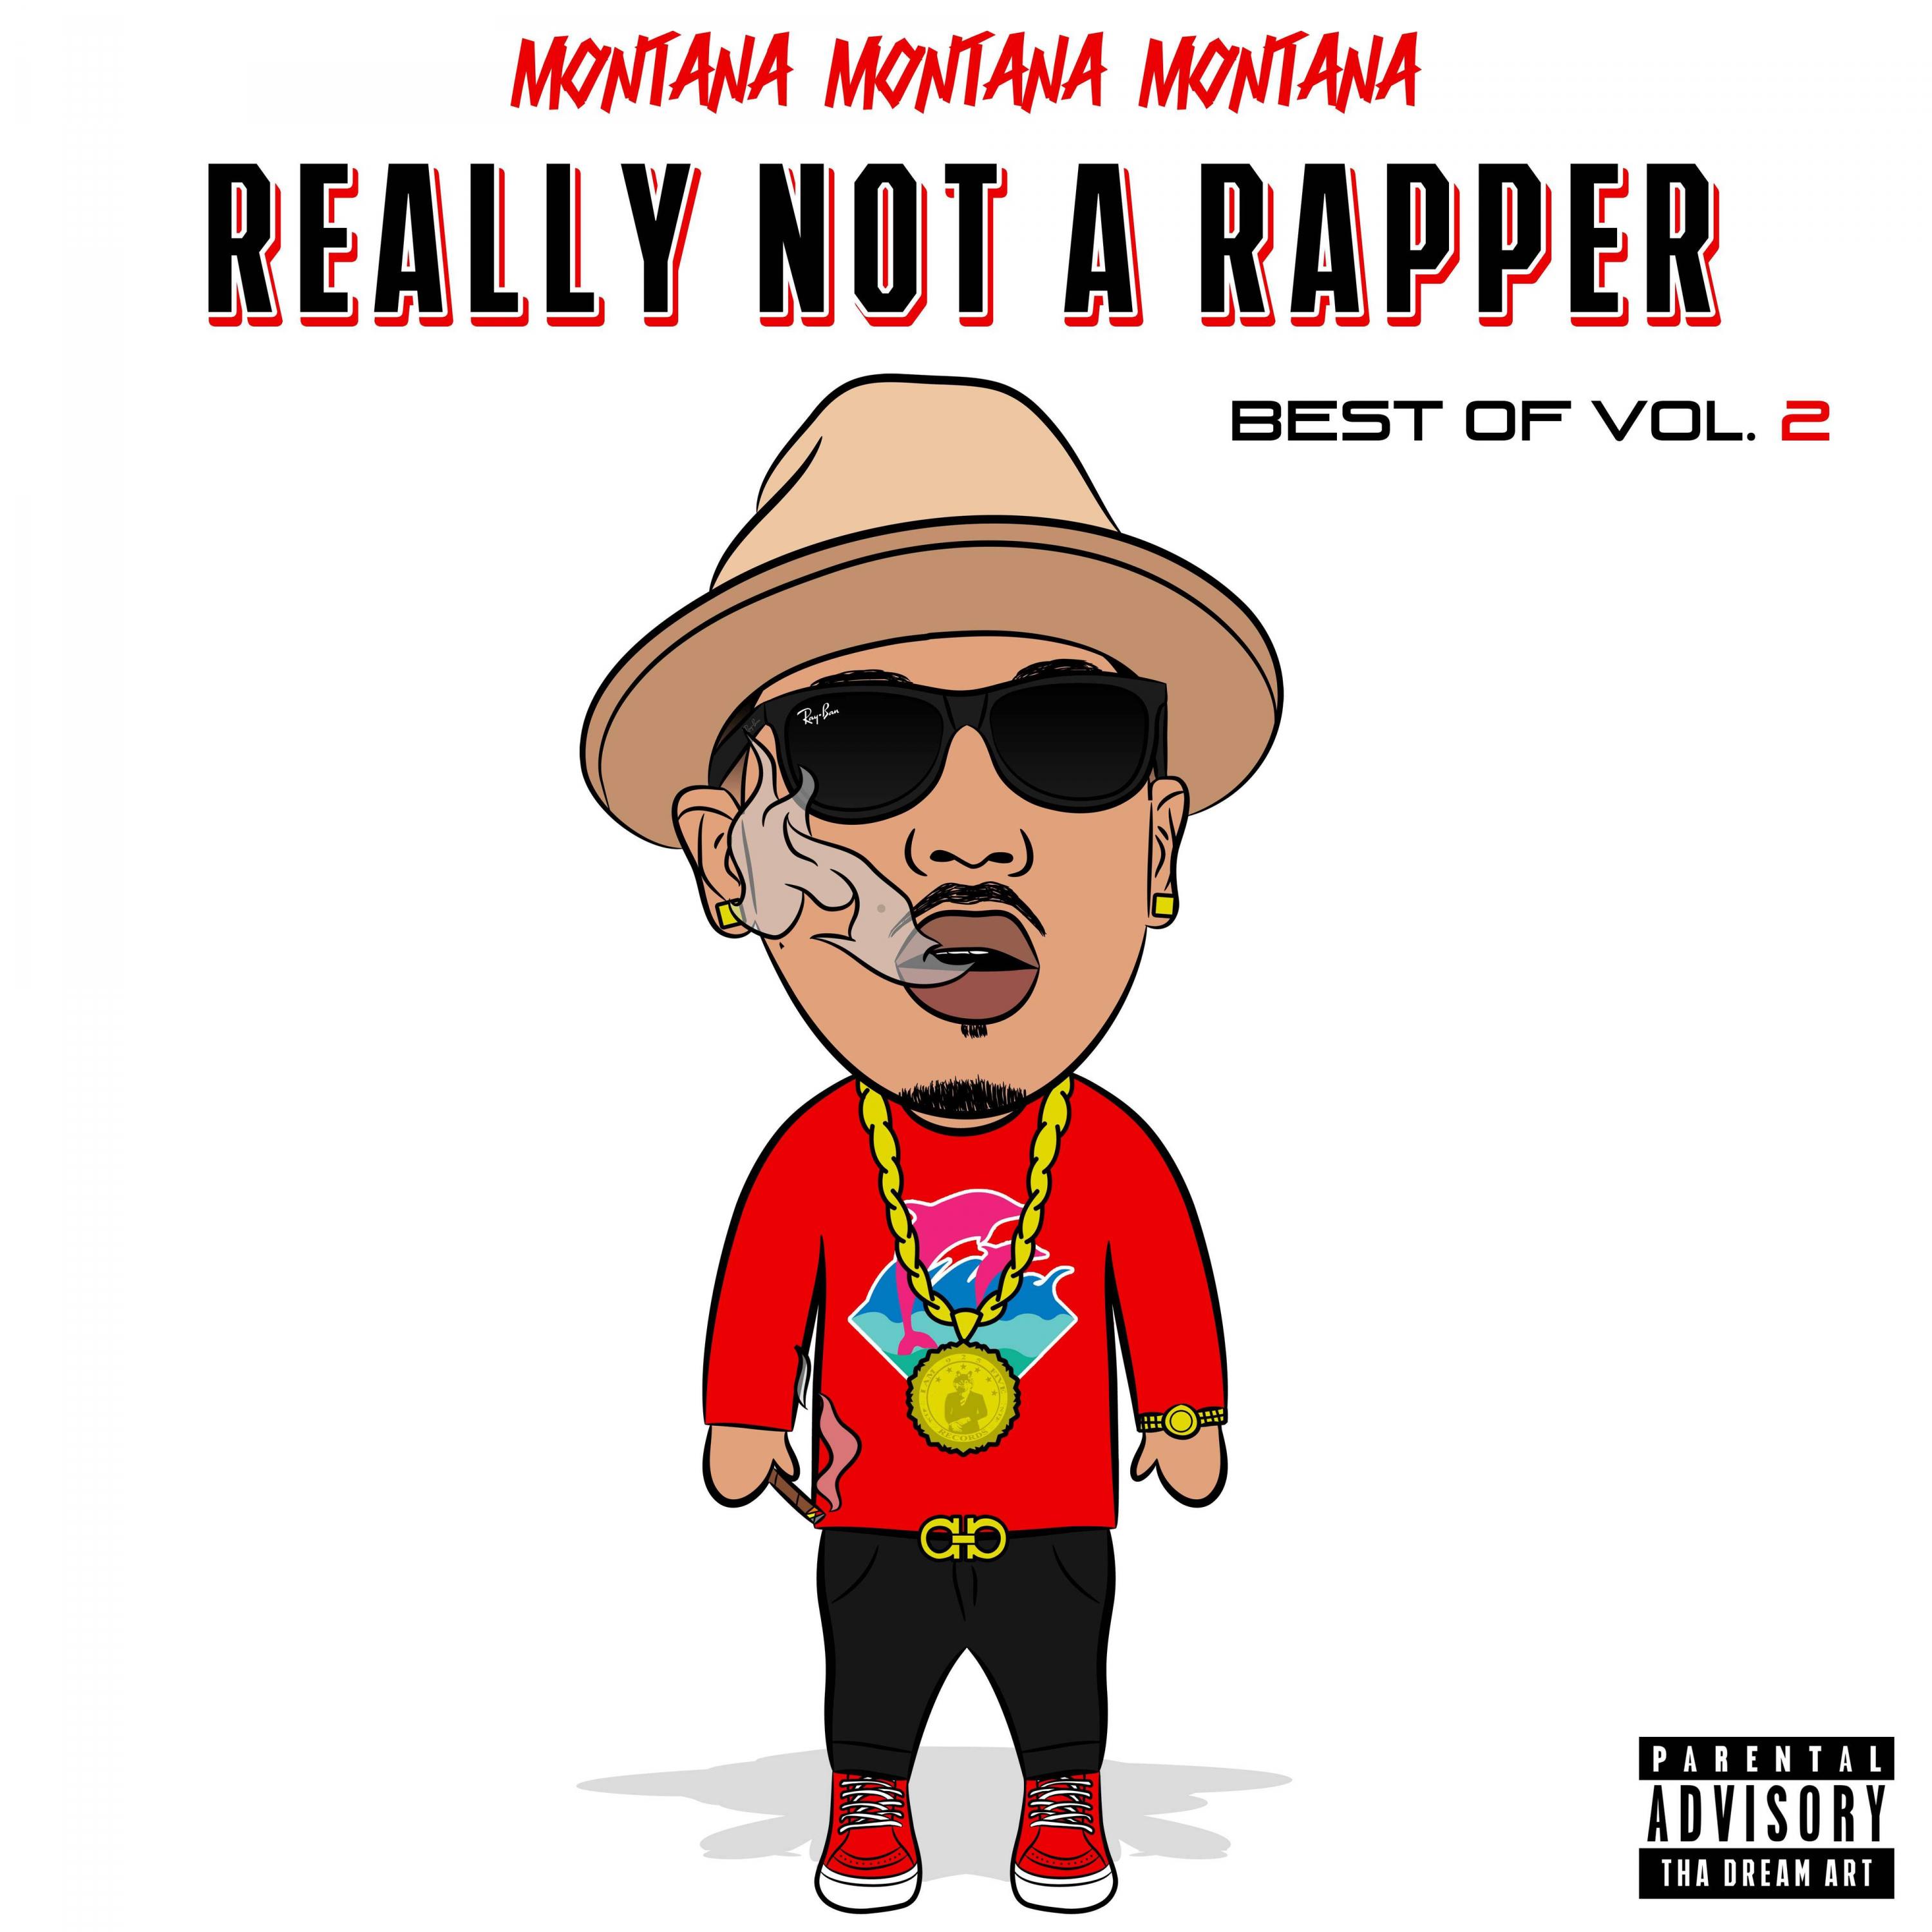 Really Not a Rapper: Best of, Vol. 2